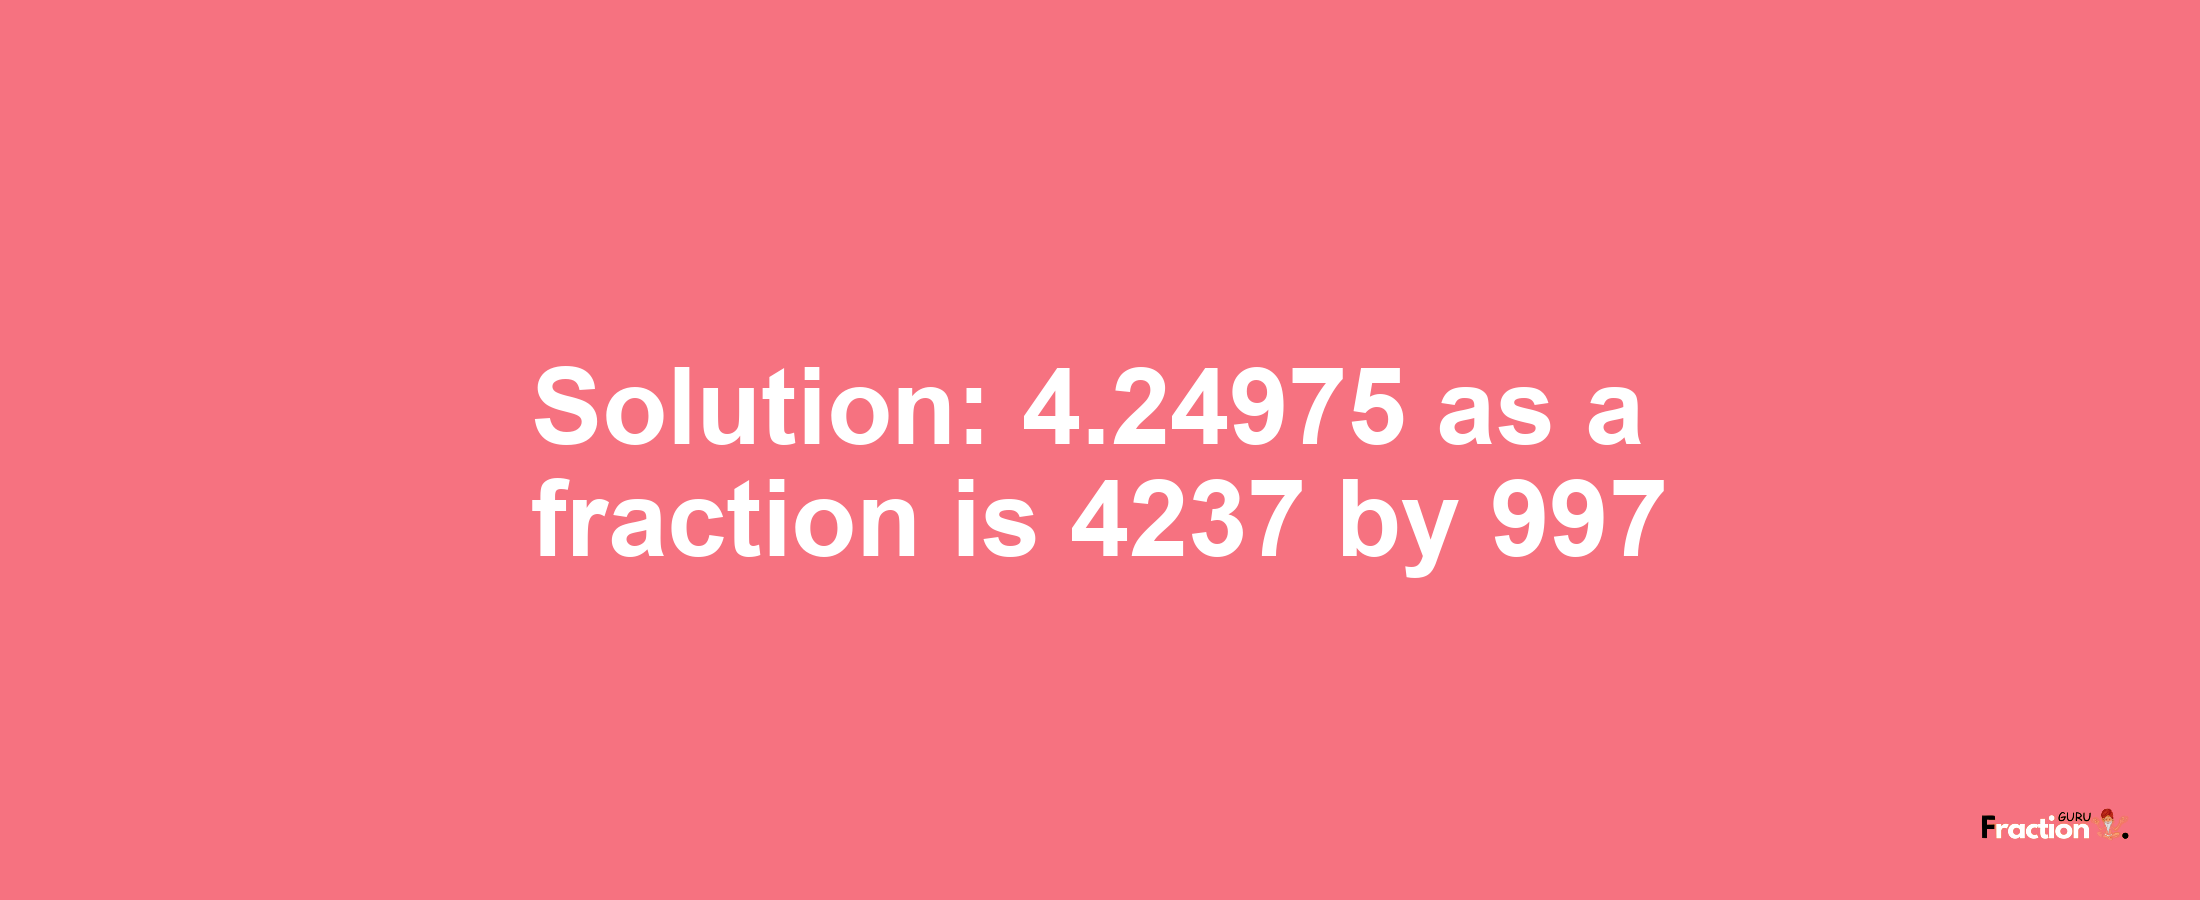 Solution:4.24975 as a fraction is 4237/997